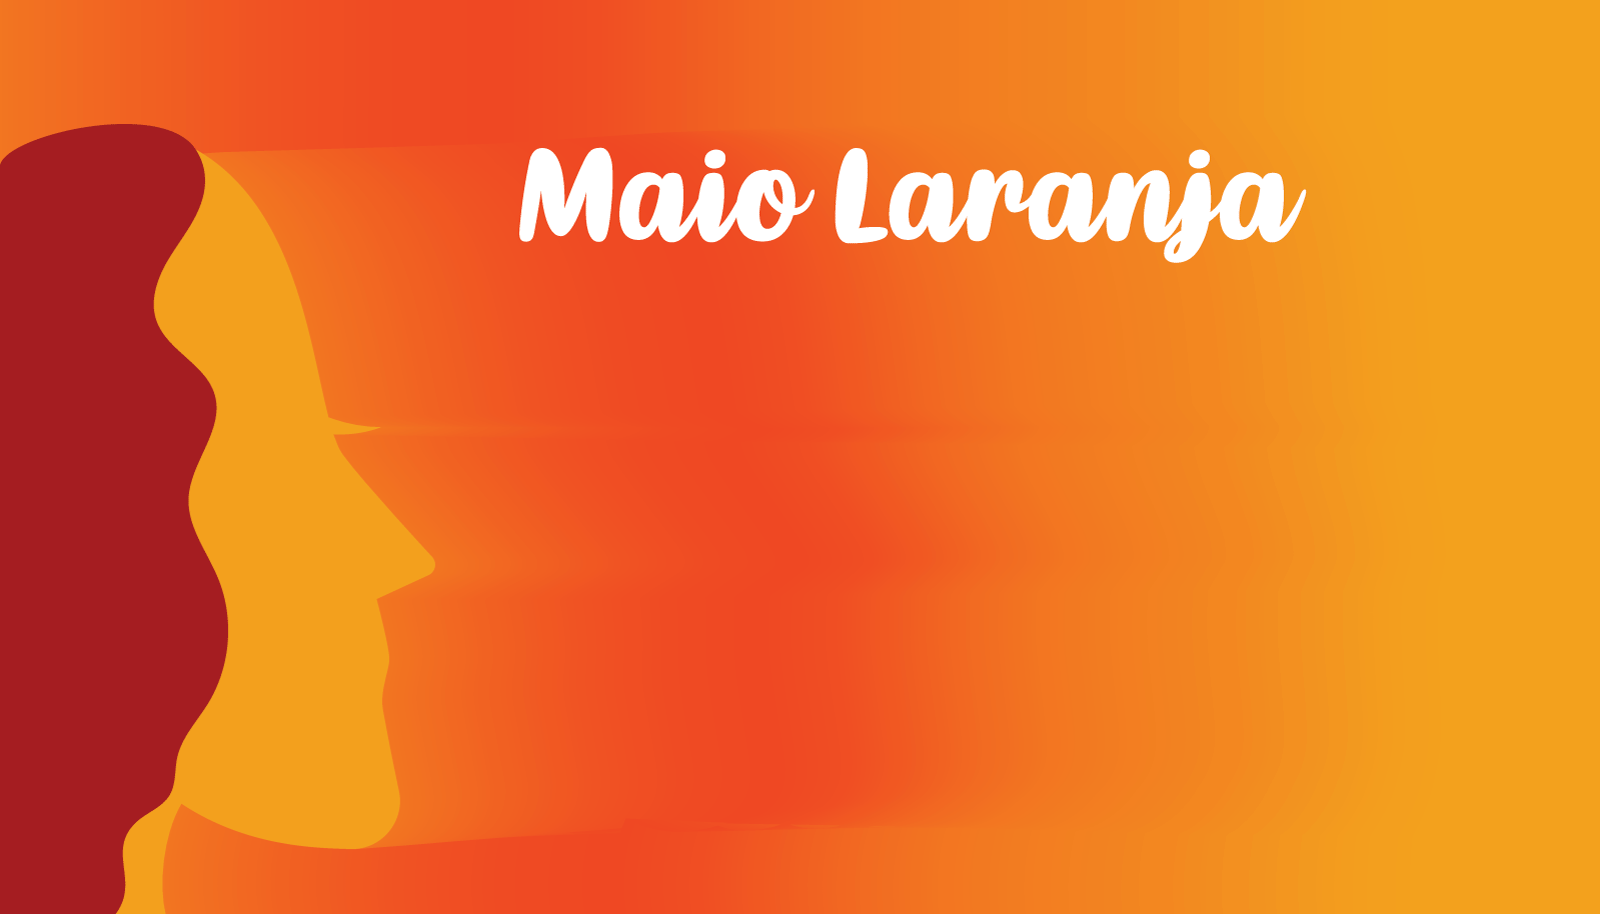 Maio Laranja background Maio laranja campaign against violence research of children 18 may template Logo Template